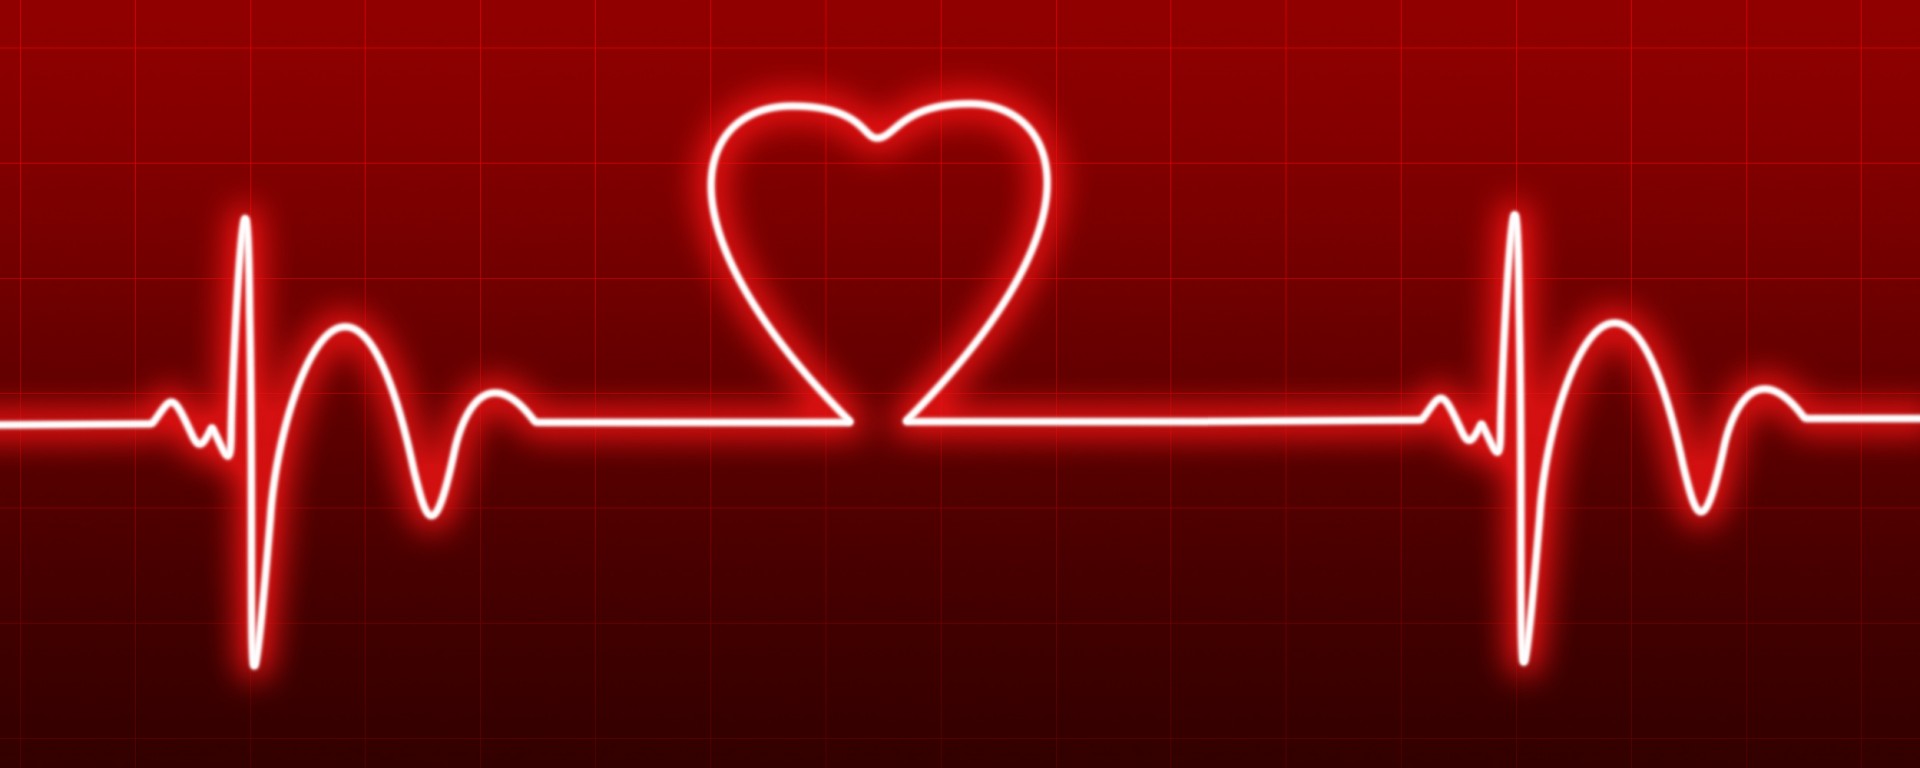 Heartbeat Free Stock Photo - Public Domain Pictures